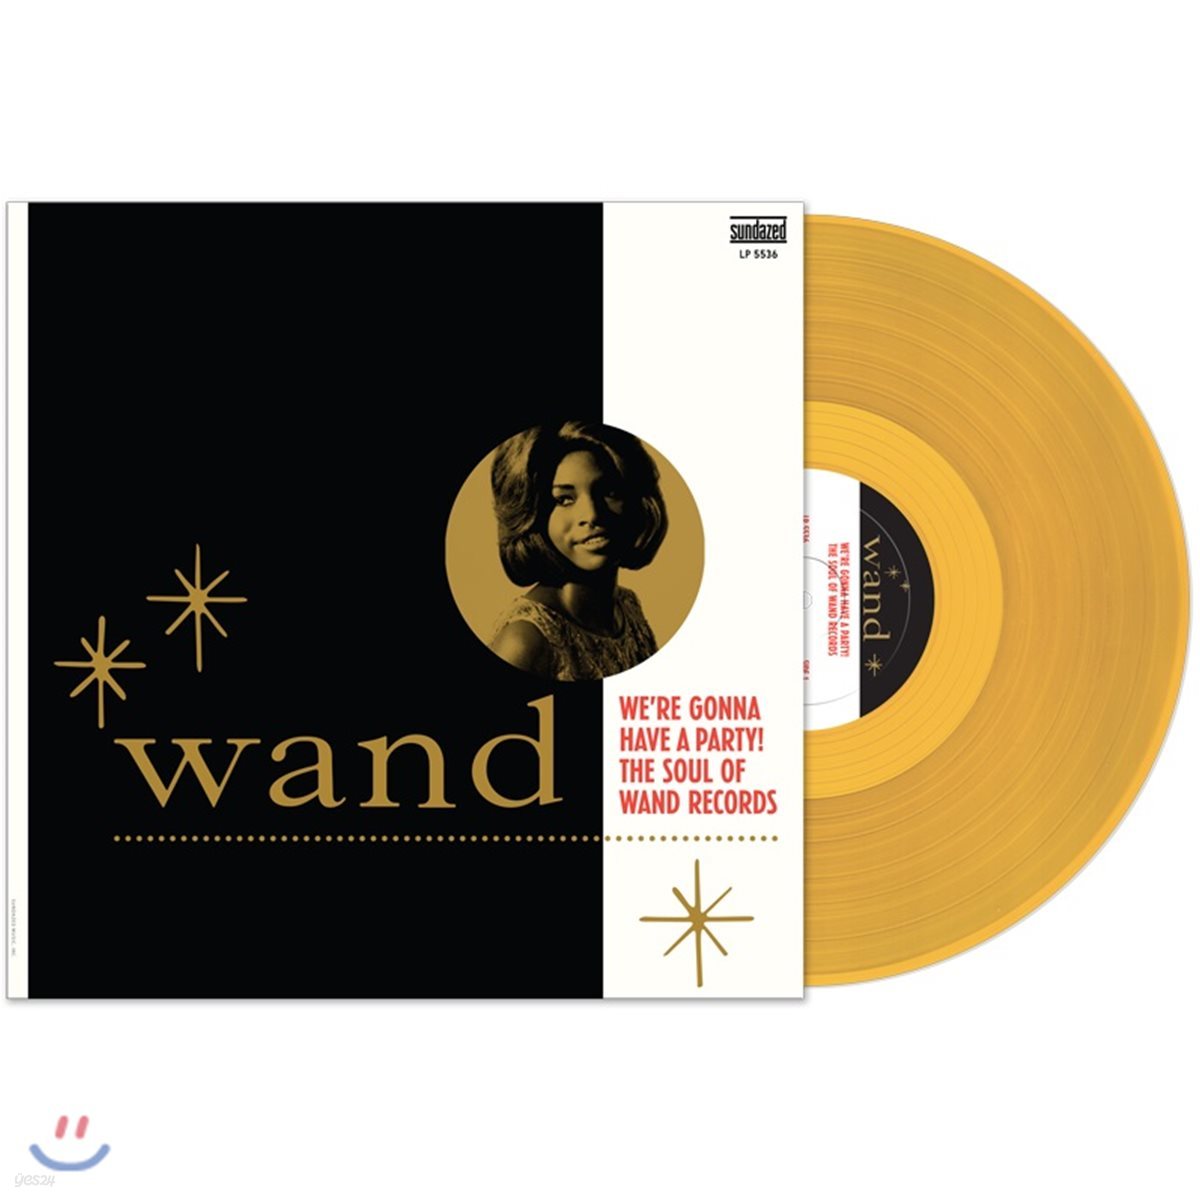 We're Gonna Have A Party! The Soul Of Wand Records (완드 레코즈 컬렉션) [골드 컬러 LP]